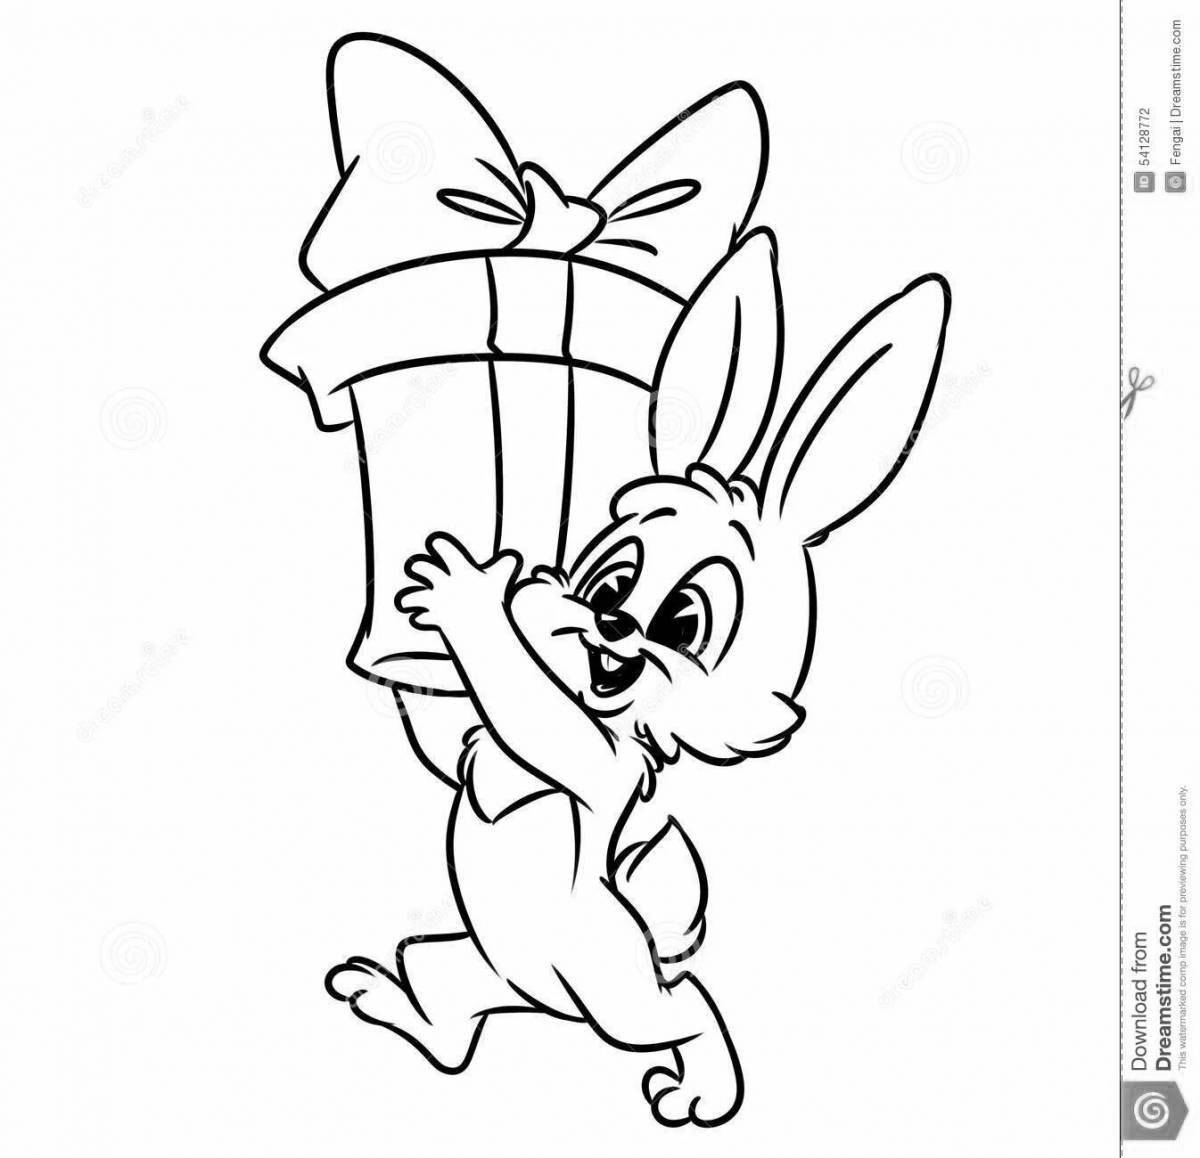 Glowing hare coloring page